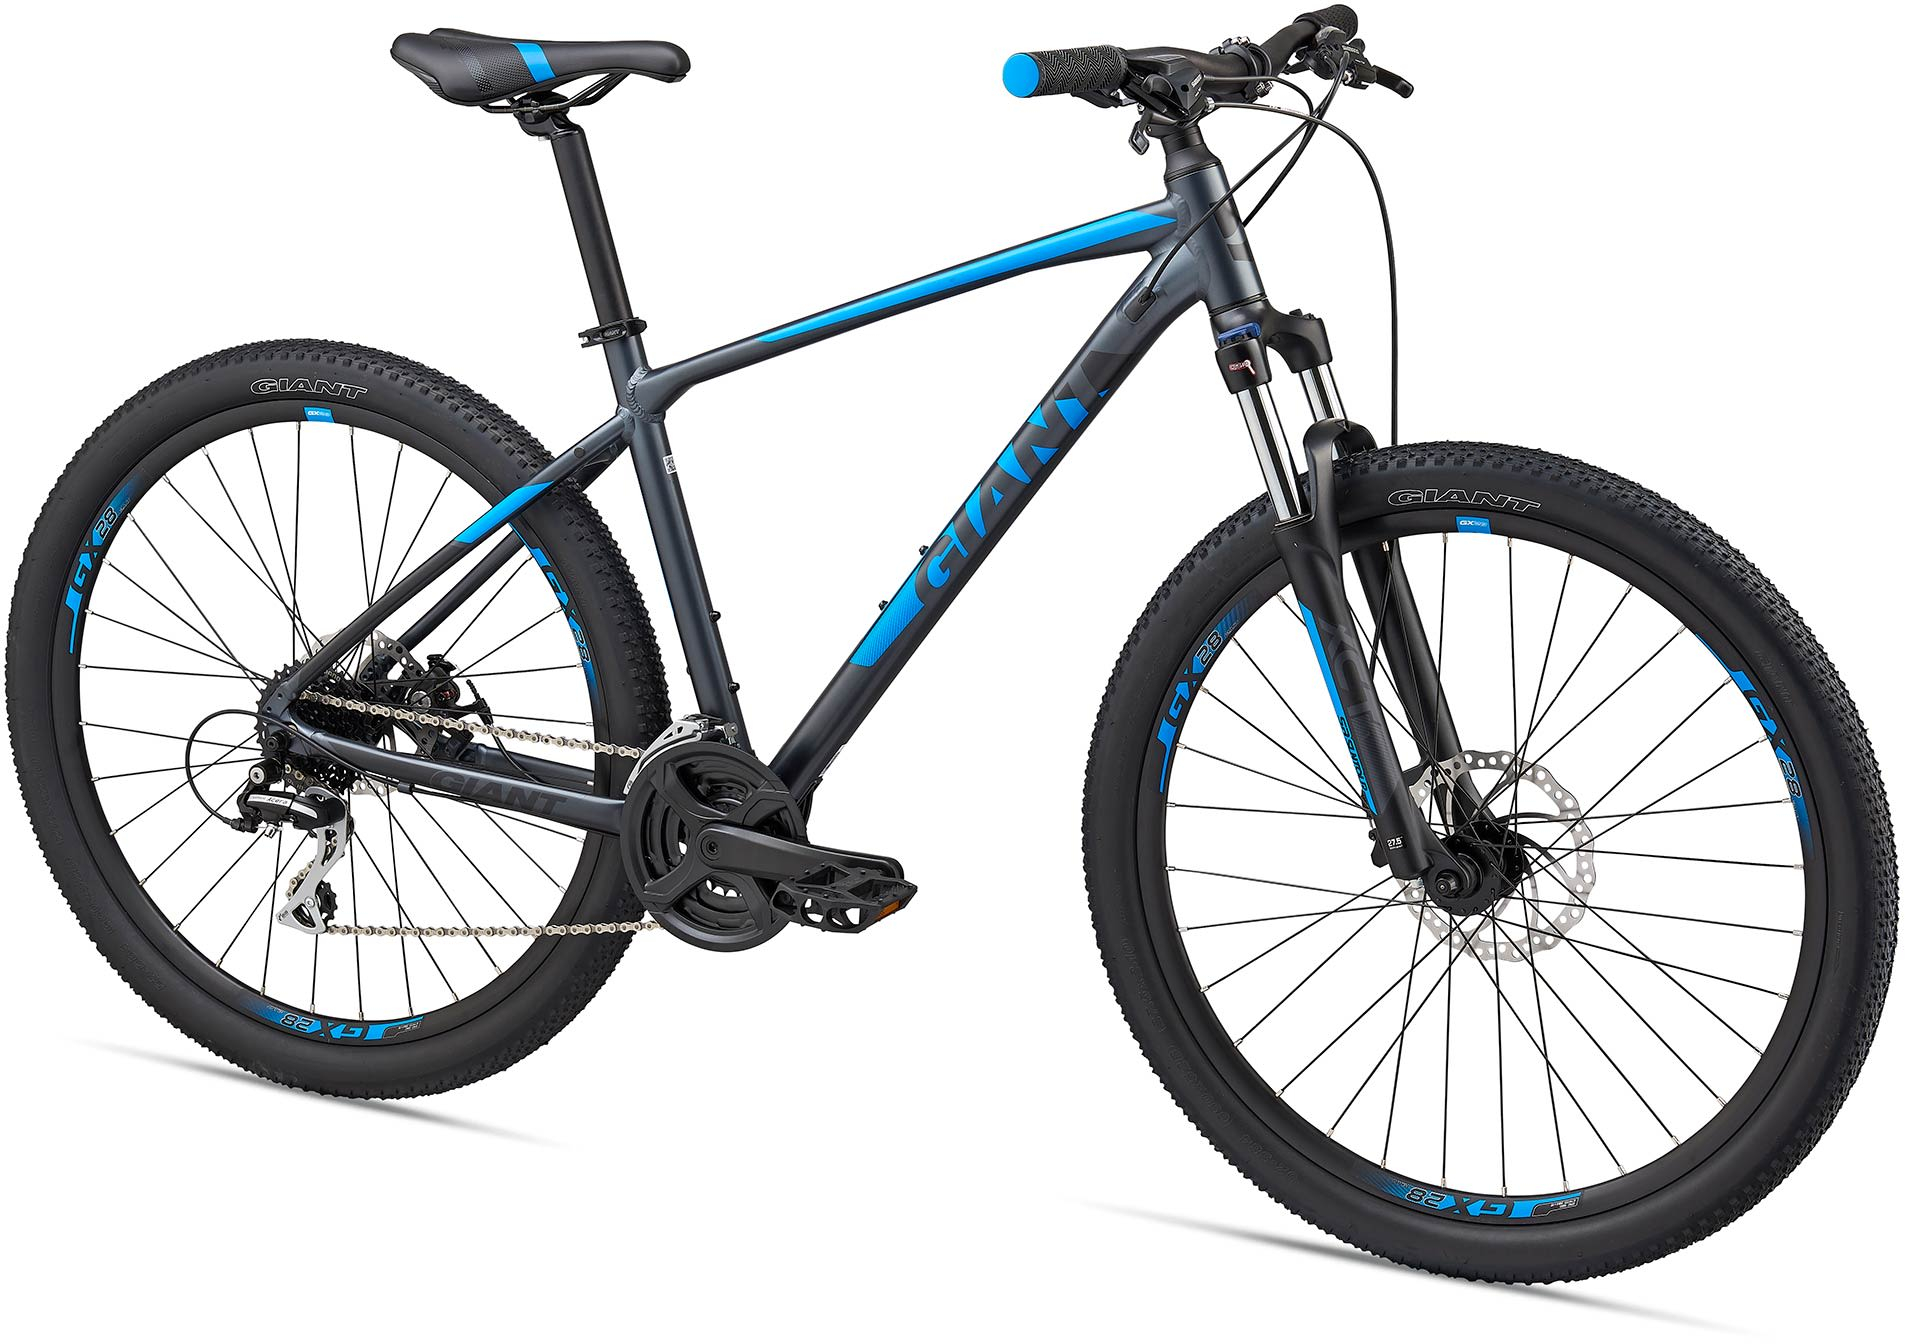 2020 Giant ATX 1 - Specs, Reviews, Images - Mountain Bike Database